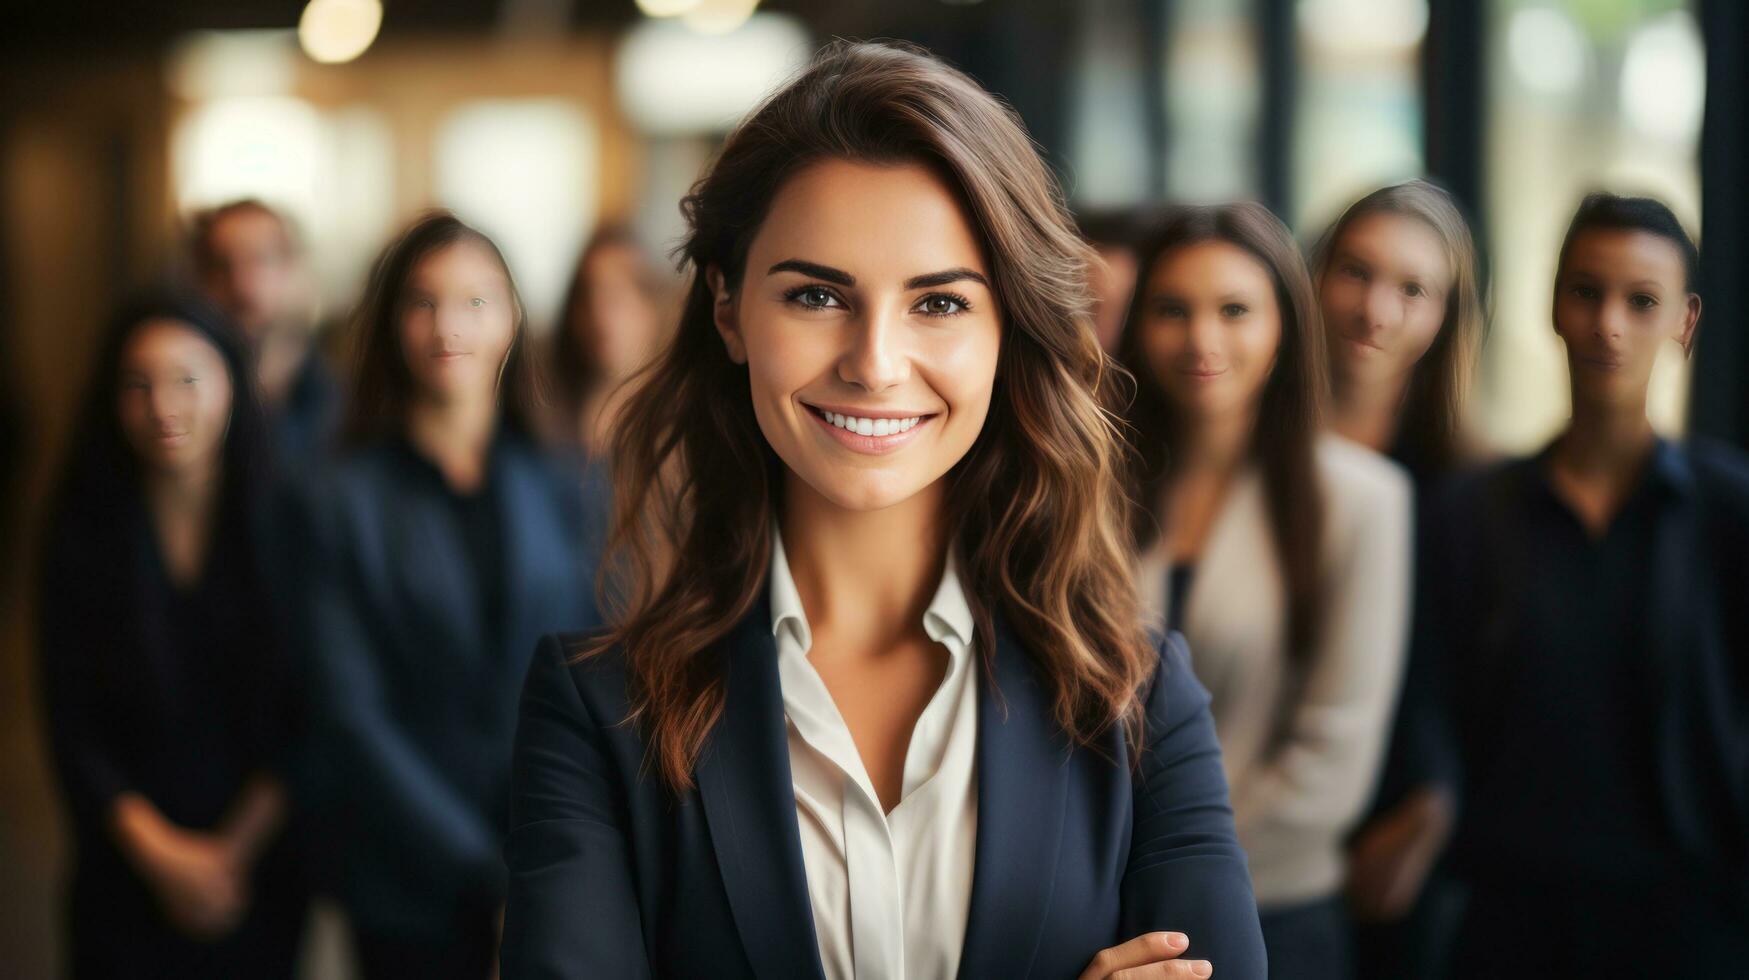 Confident businesswoman standing in front of her team photo